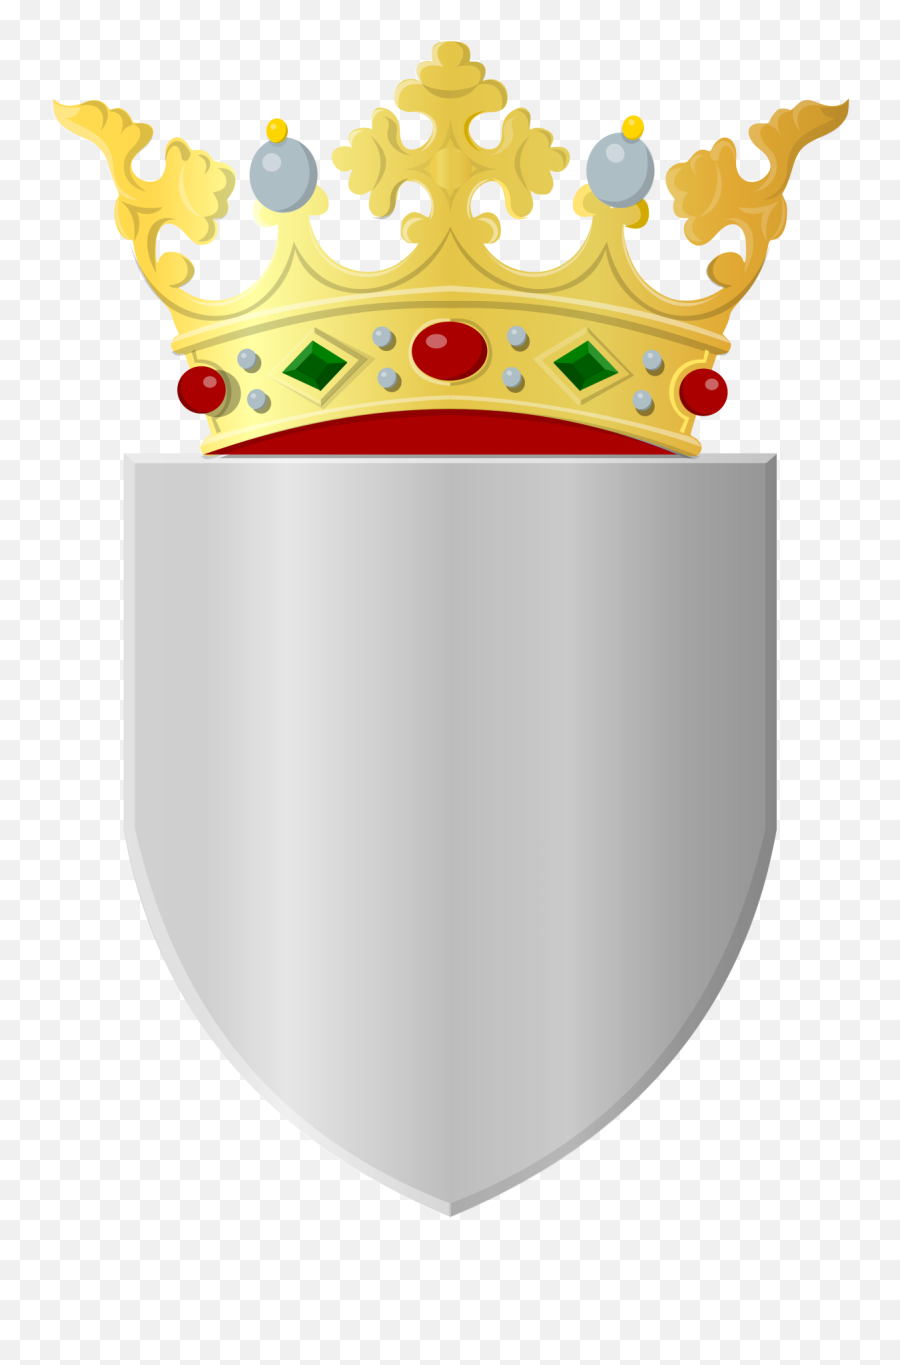 Filesilver Shield With Golden Crownsvg - Wikimedia Commons Silver Shield Emoji,Gold Crown Logo